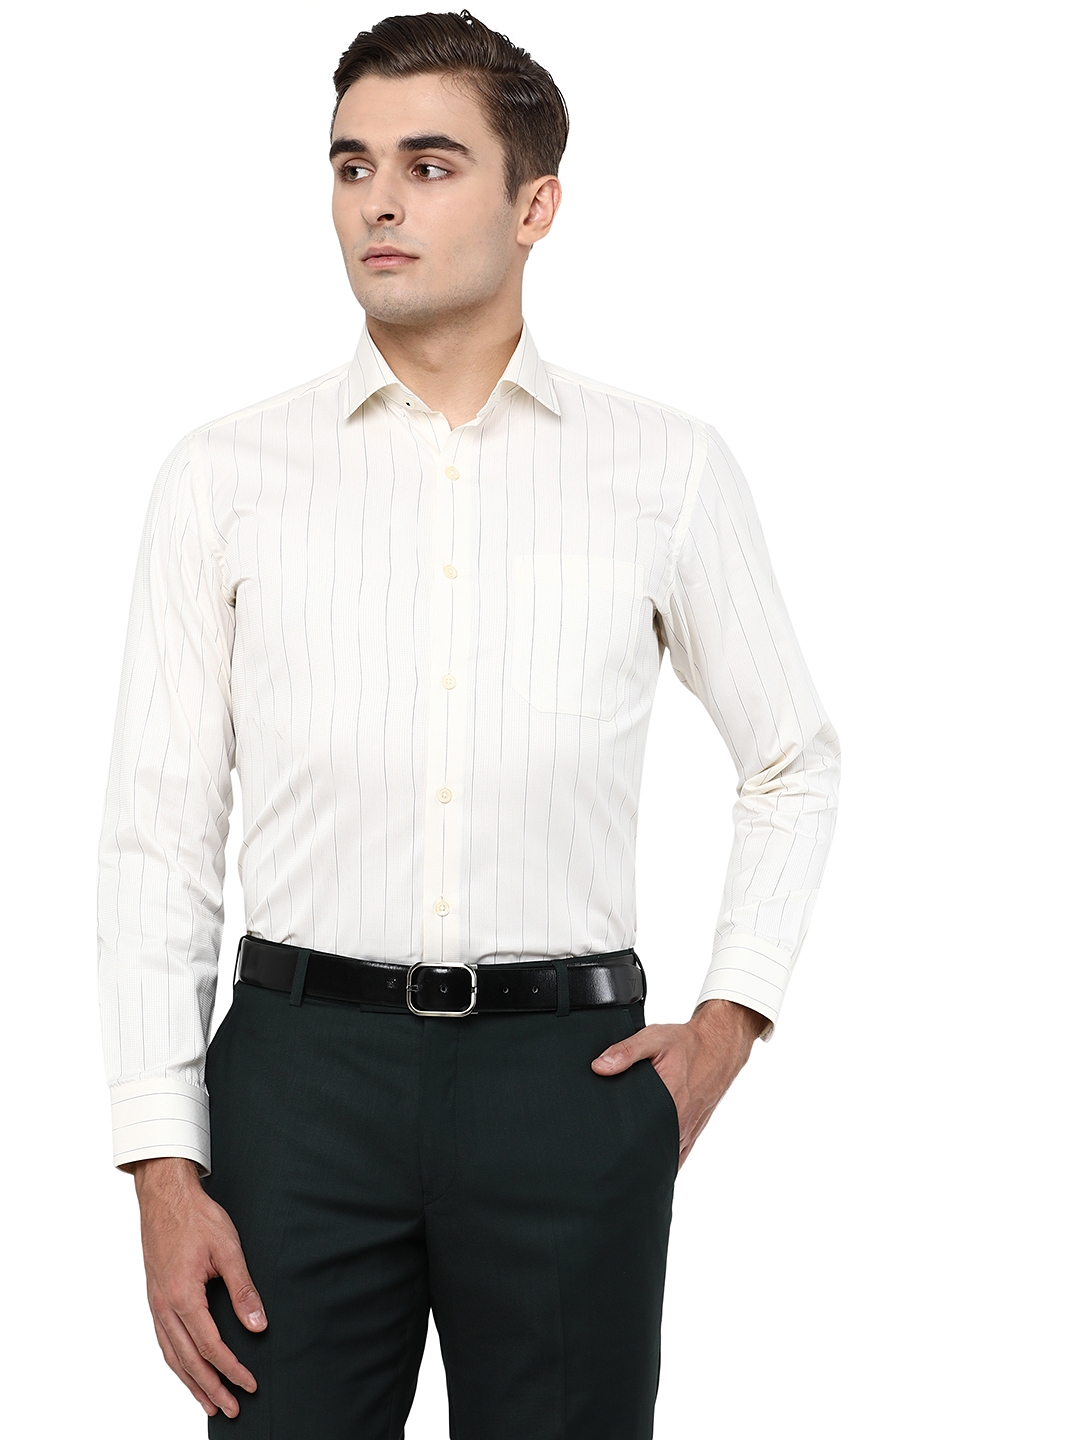 Greenfibre | White & Light Yellow Striped Slim Fit Formal Shirt | Greenfibre